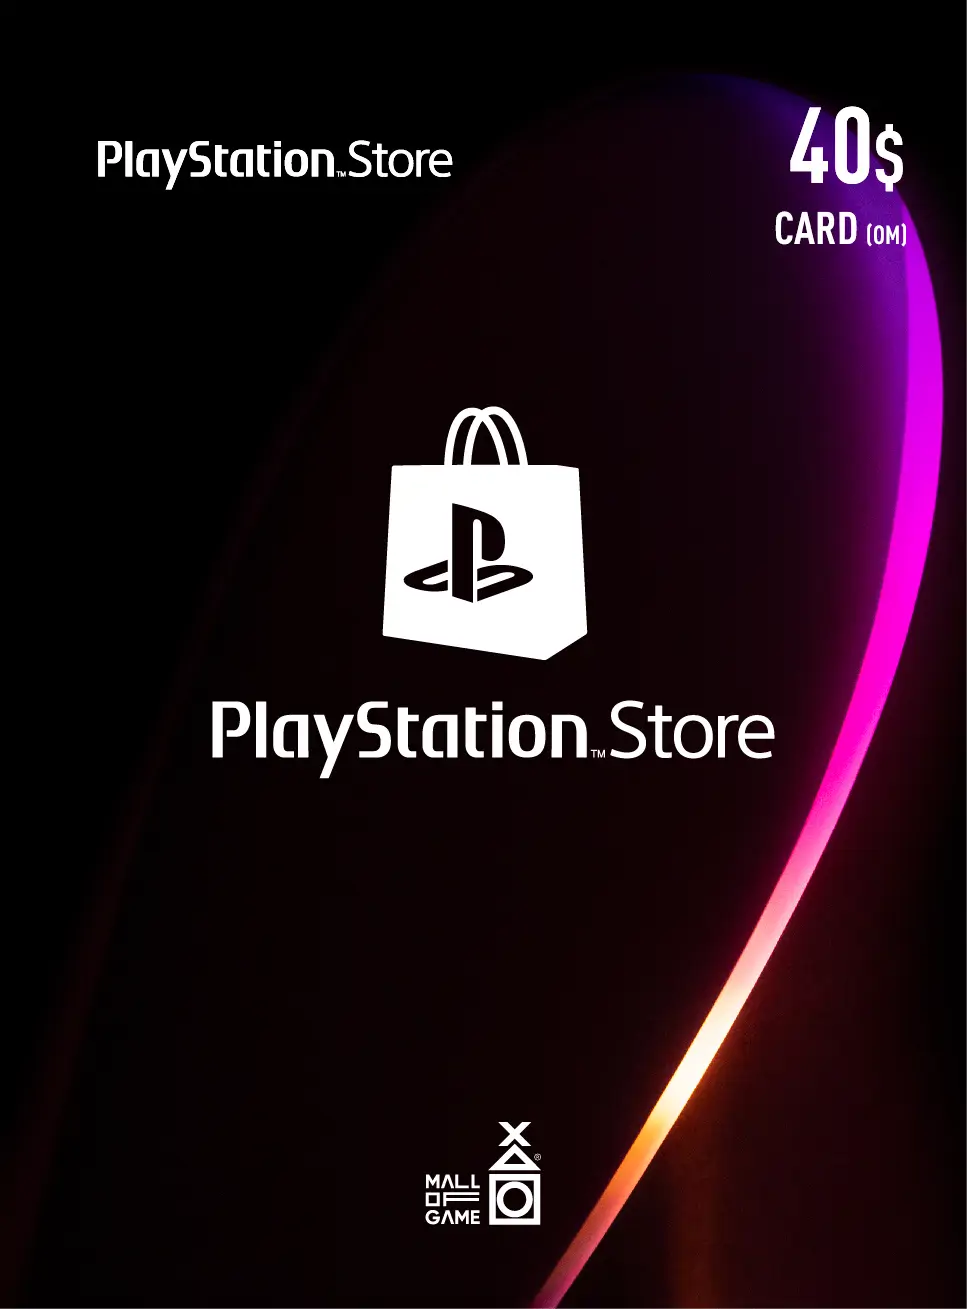 PlayStation™Store USD40 Gift Cards (OM)